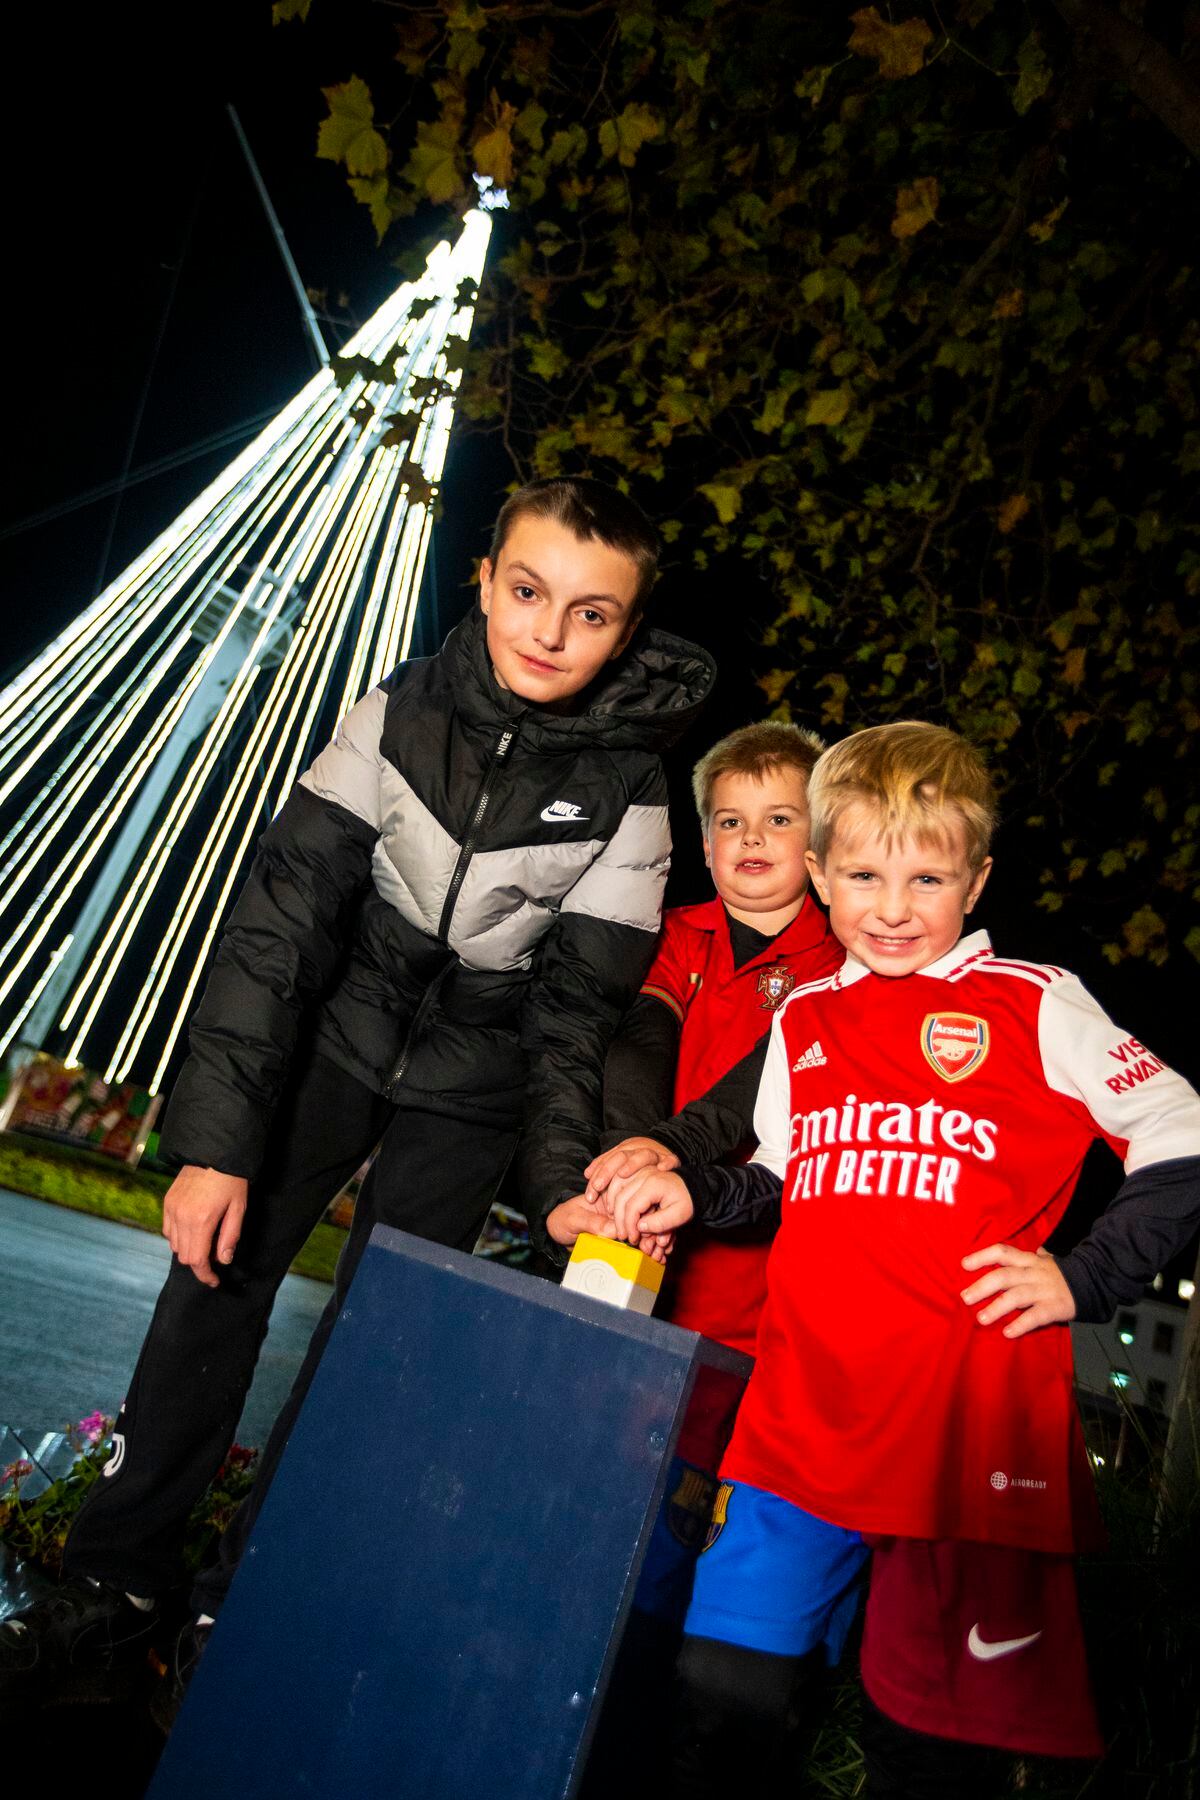 The Tree of Joy lights were switched on by three brothers who recently lost their mother. Left to right, Jake Jones, 13, Joseph Hillier, 7, and Shaymus Hillier, 6. (Picture by Luke Le Prevost, 31507796)